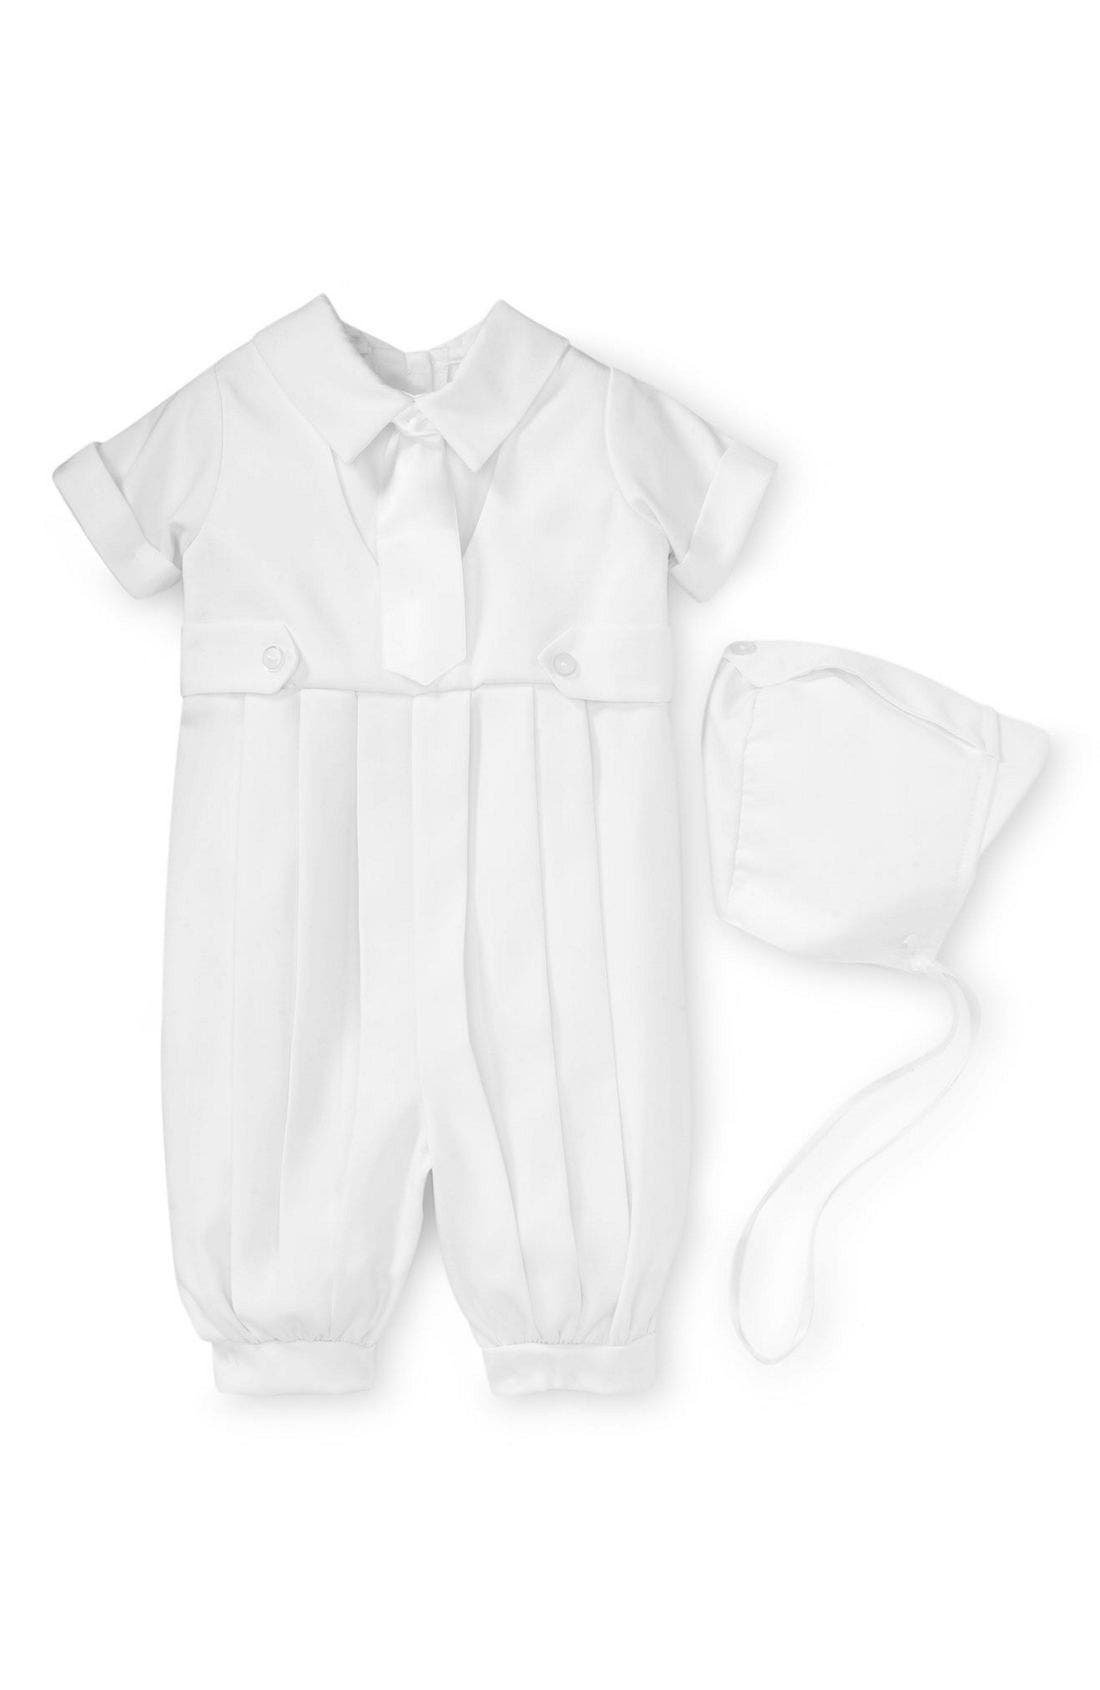 3t boy baptism outfits